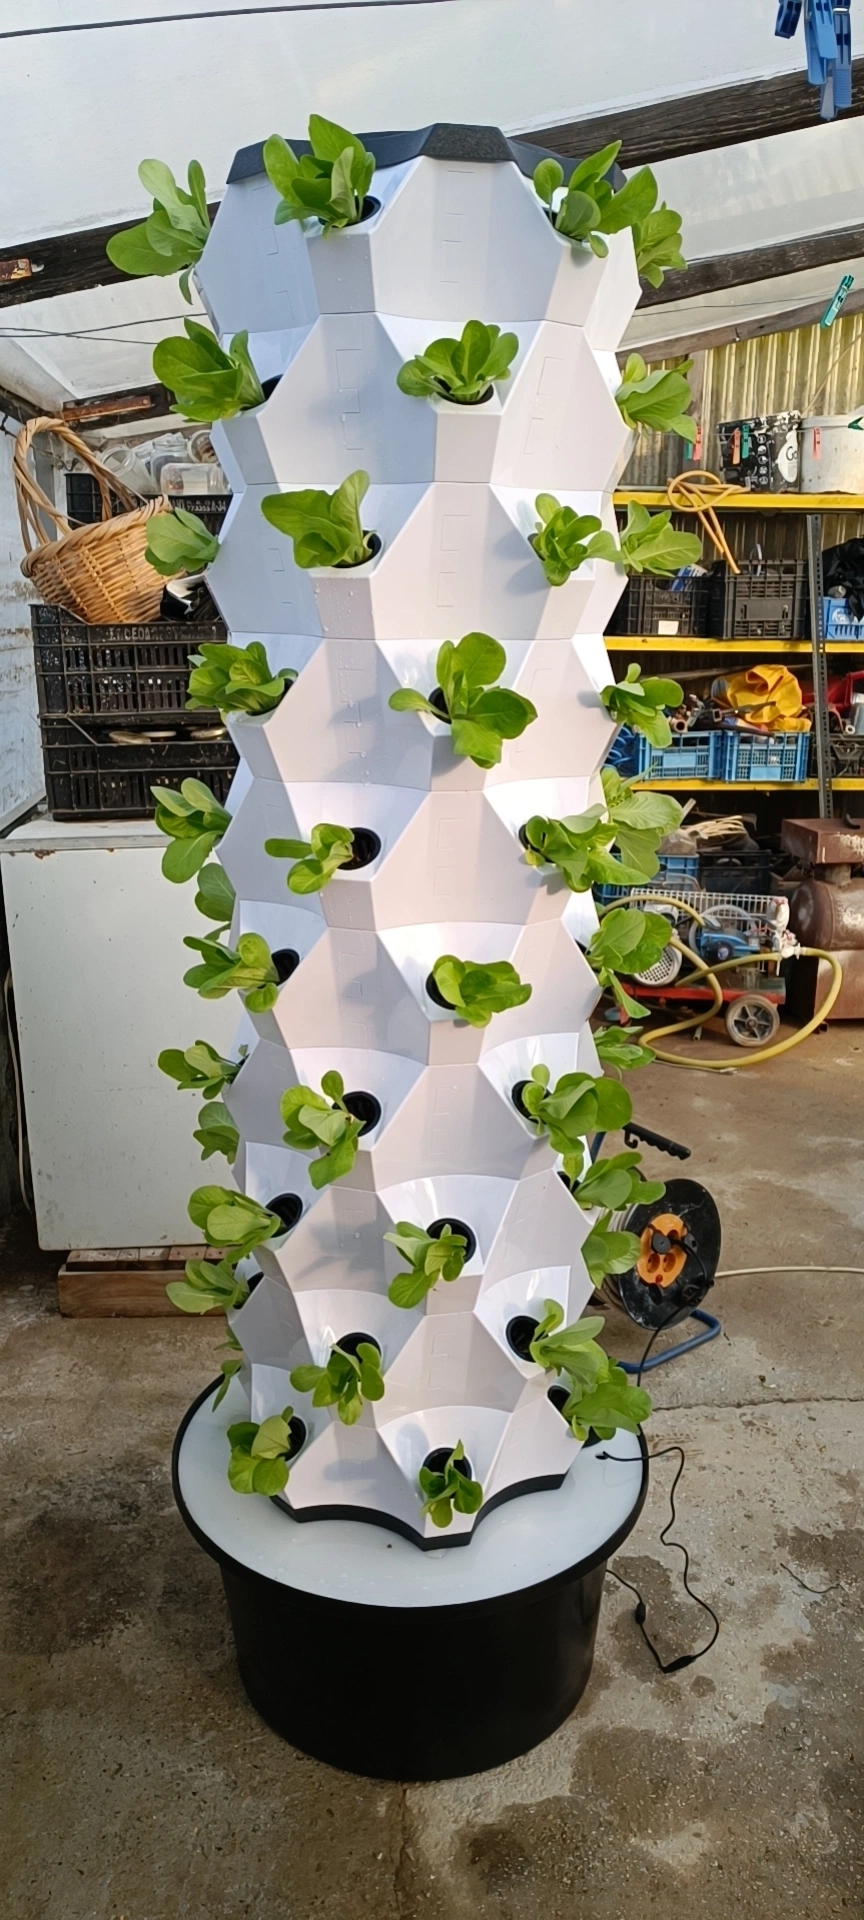 Hydroponics Greenhouse Garden Farm Indoor Plant Vertical Tower Growing Systems